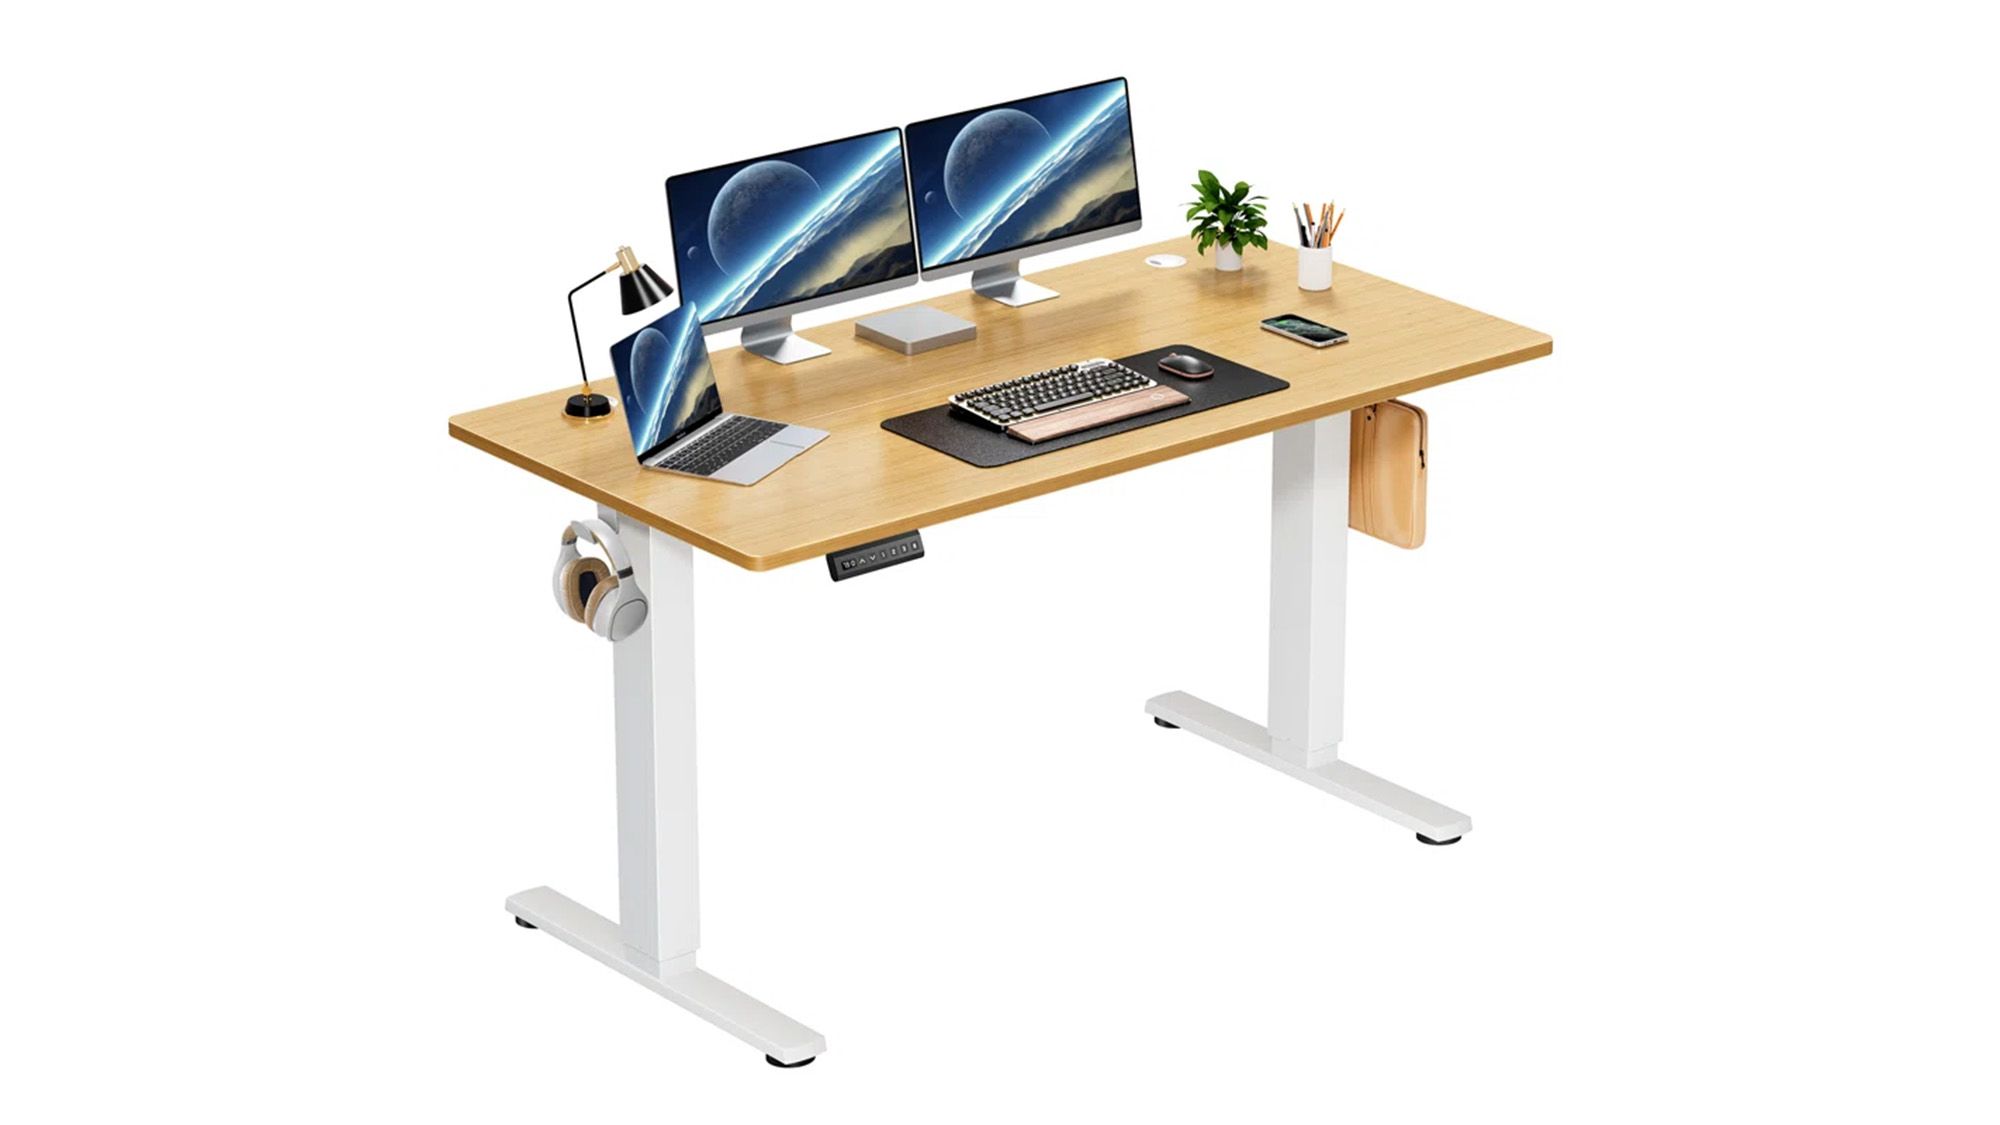 Black Friday Deals Round-Up - The Well-Appointed Desk